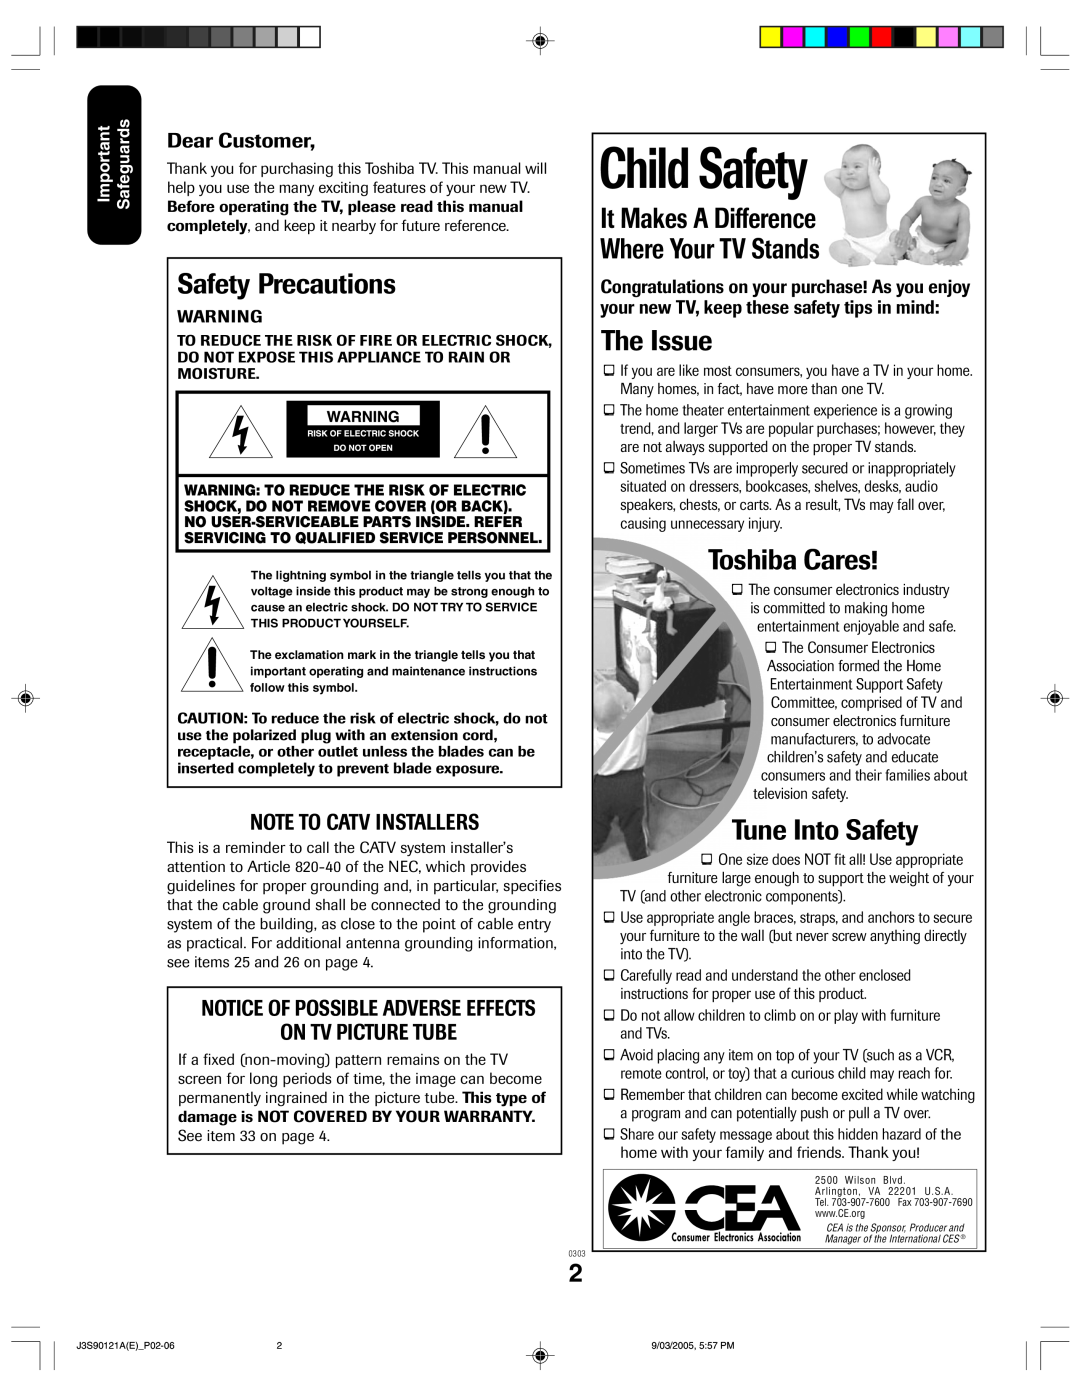 Toshiba 32AF45 Safety Precautions, It Makes A Difference Where Your TV Stands, The Issue, Toshiba Cares, Tune Into Safety 